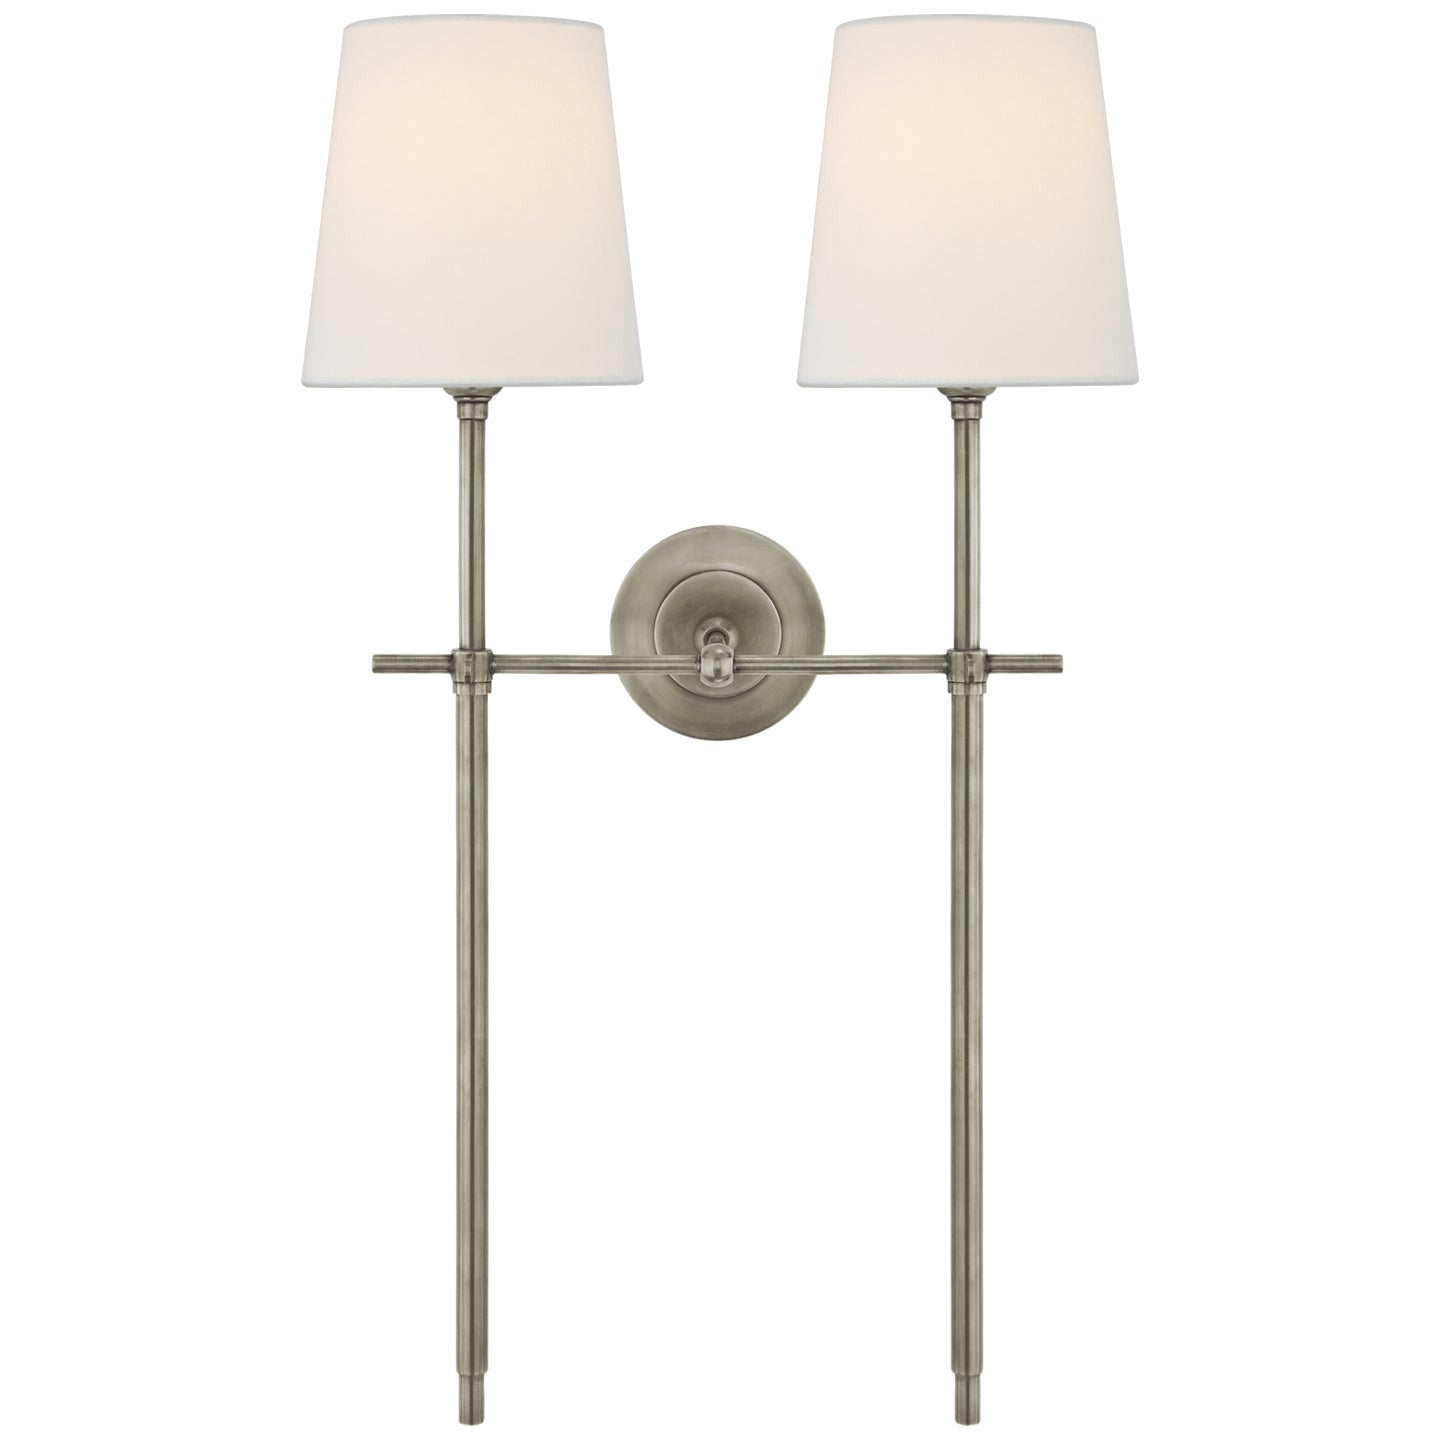 Visual Comfort Signature - TOB 2025AN-L - Two Light Wall Sconce - Bryant - Antique Nickel